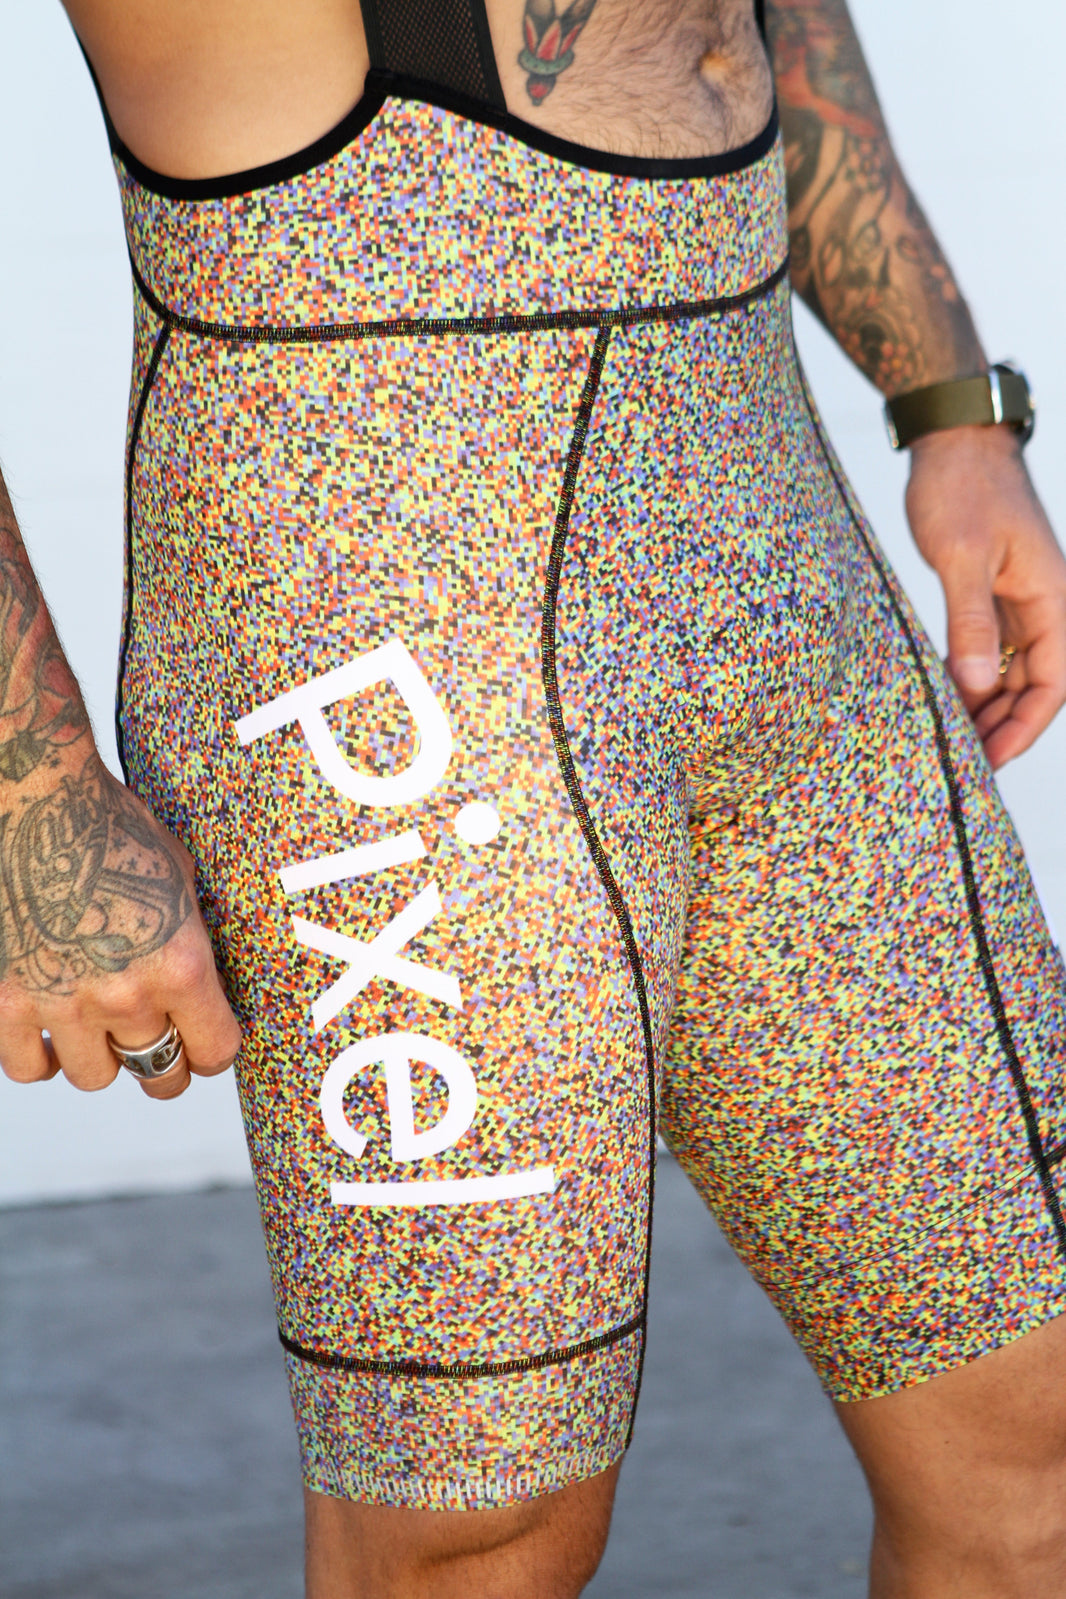 Color Speckled Pro Cycling Sports Cycling Pants